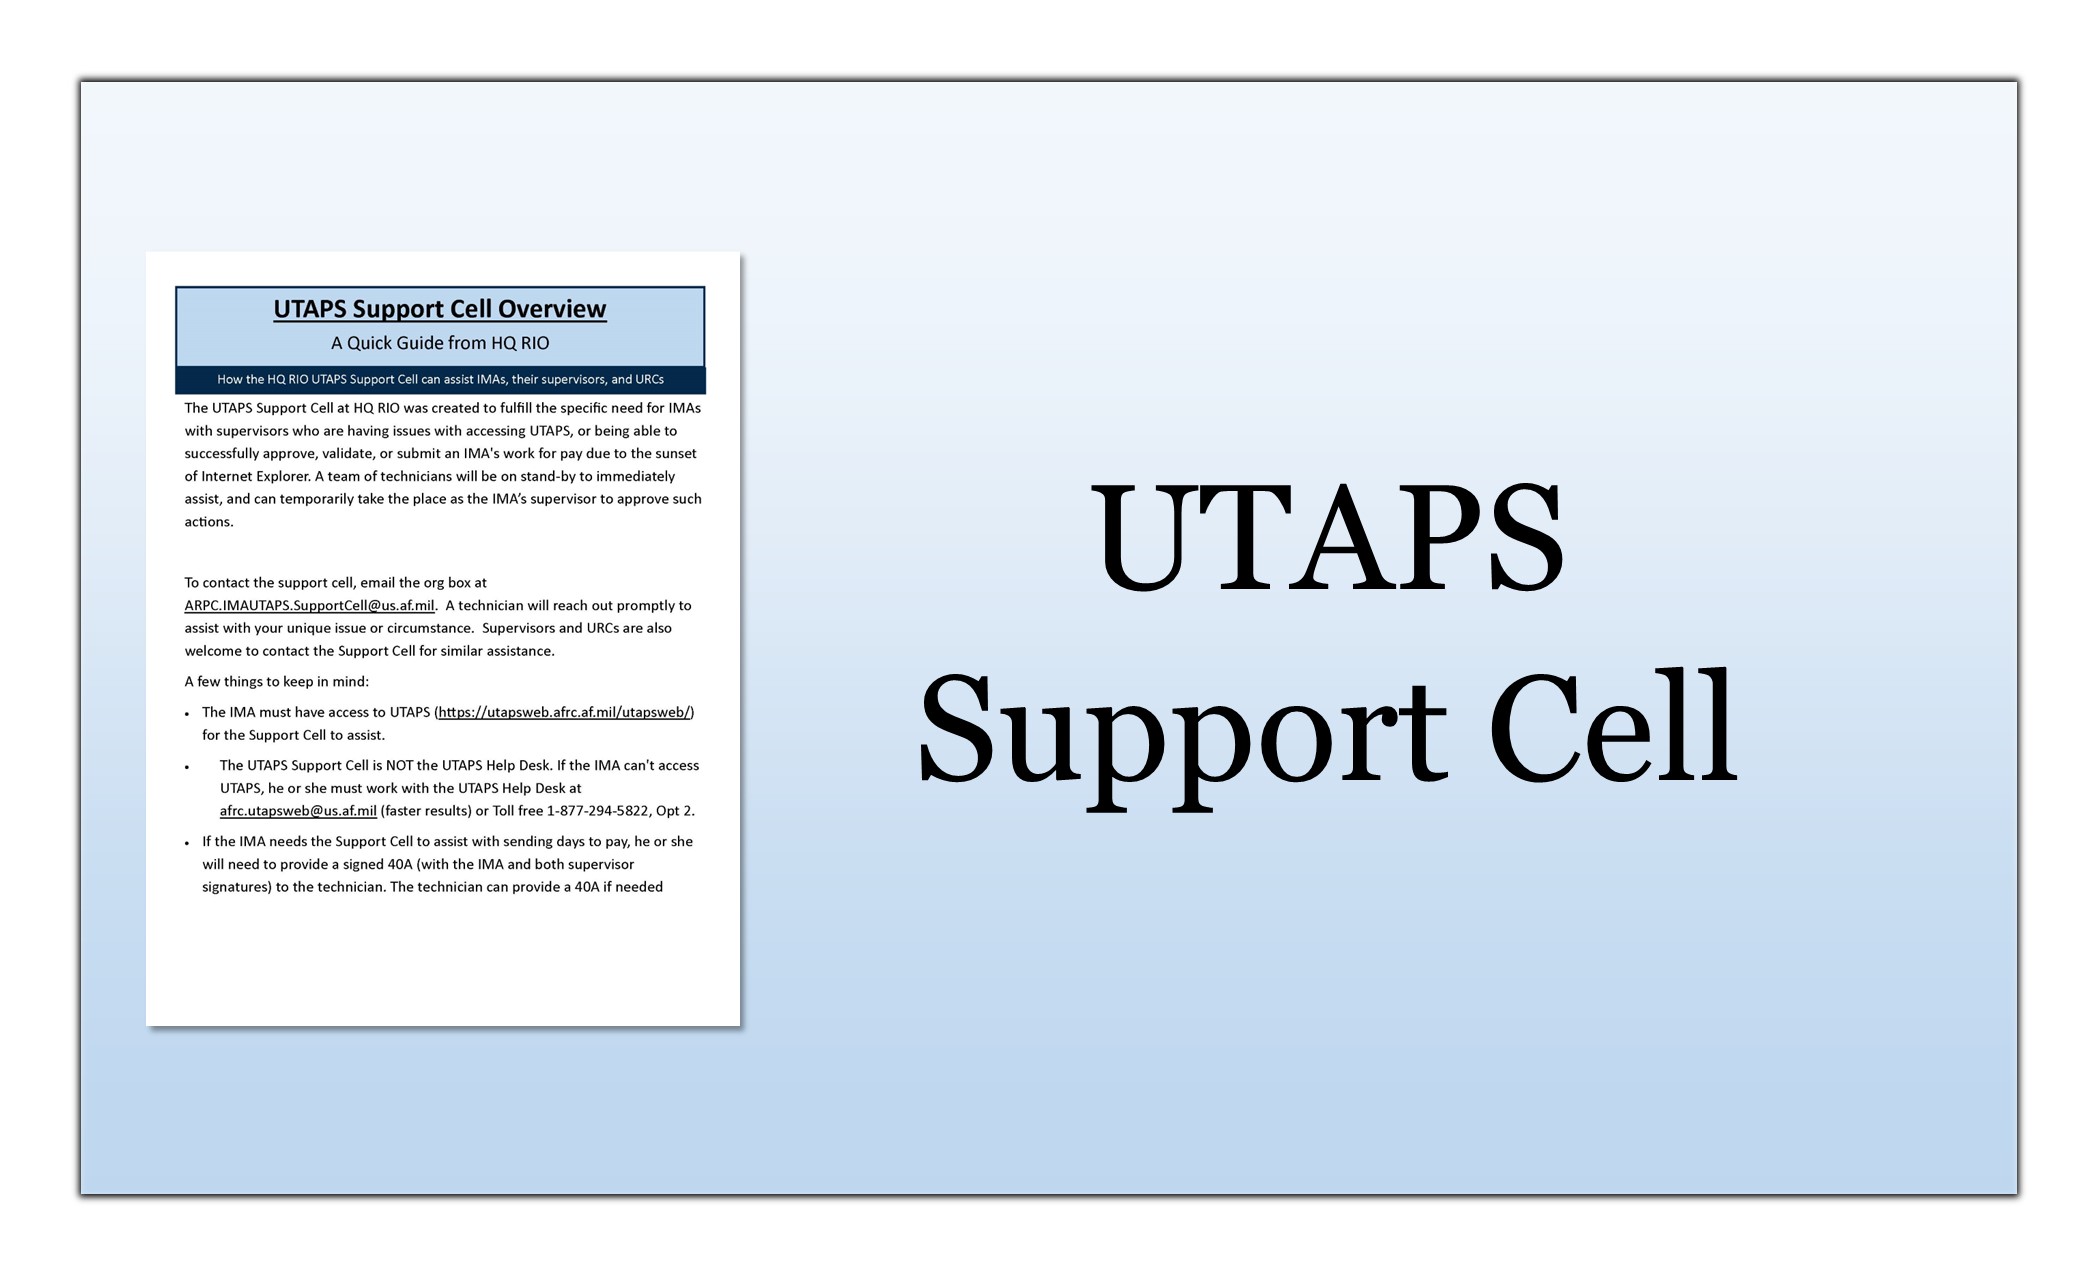 UTAPS Support Cell Quick Guide thumbnail link